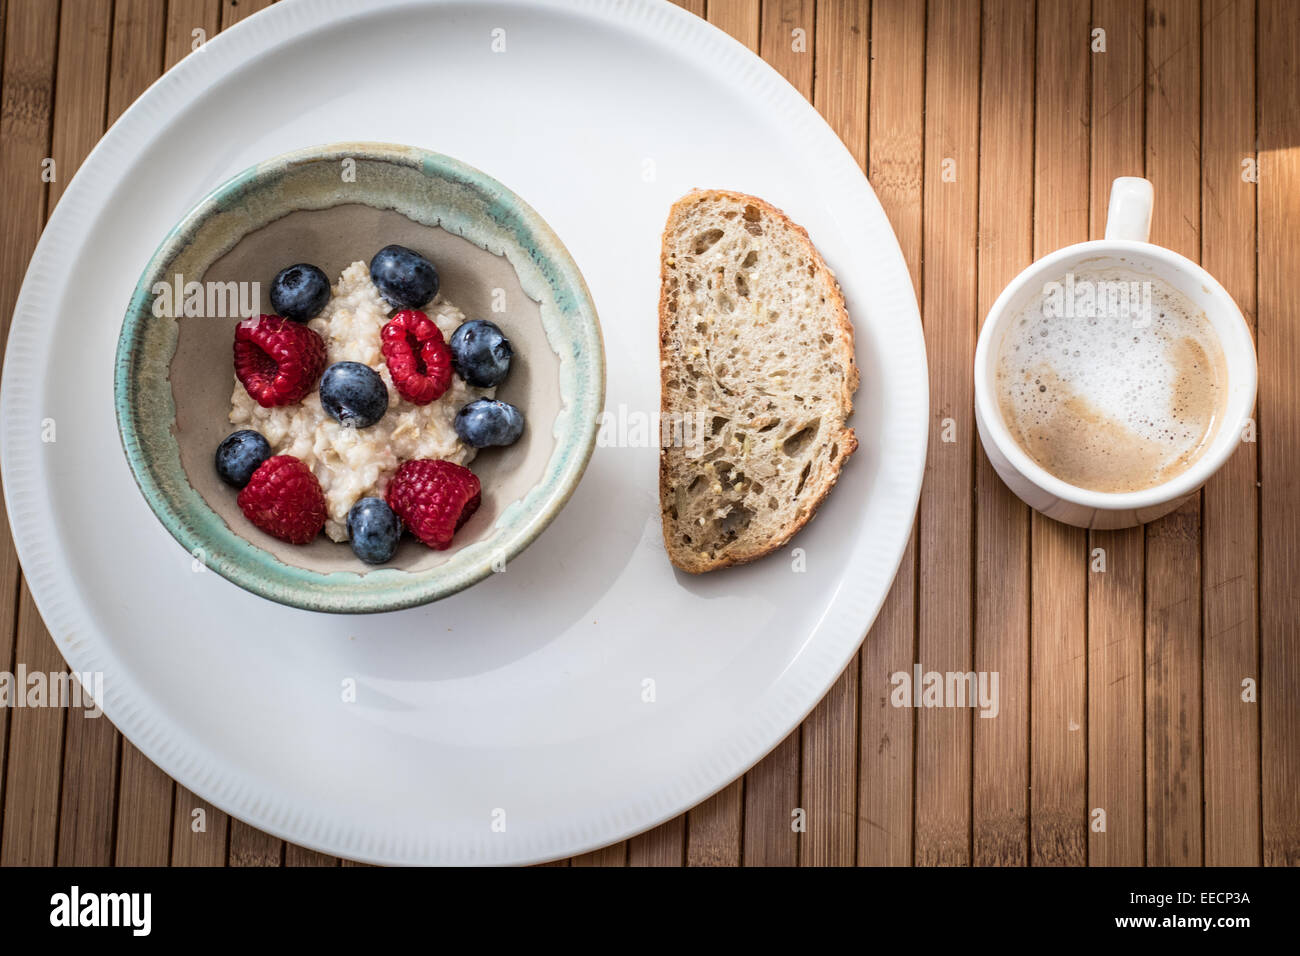 Healthy breakfast from oatmeal, whole bread and berries Stock Photo